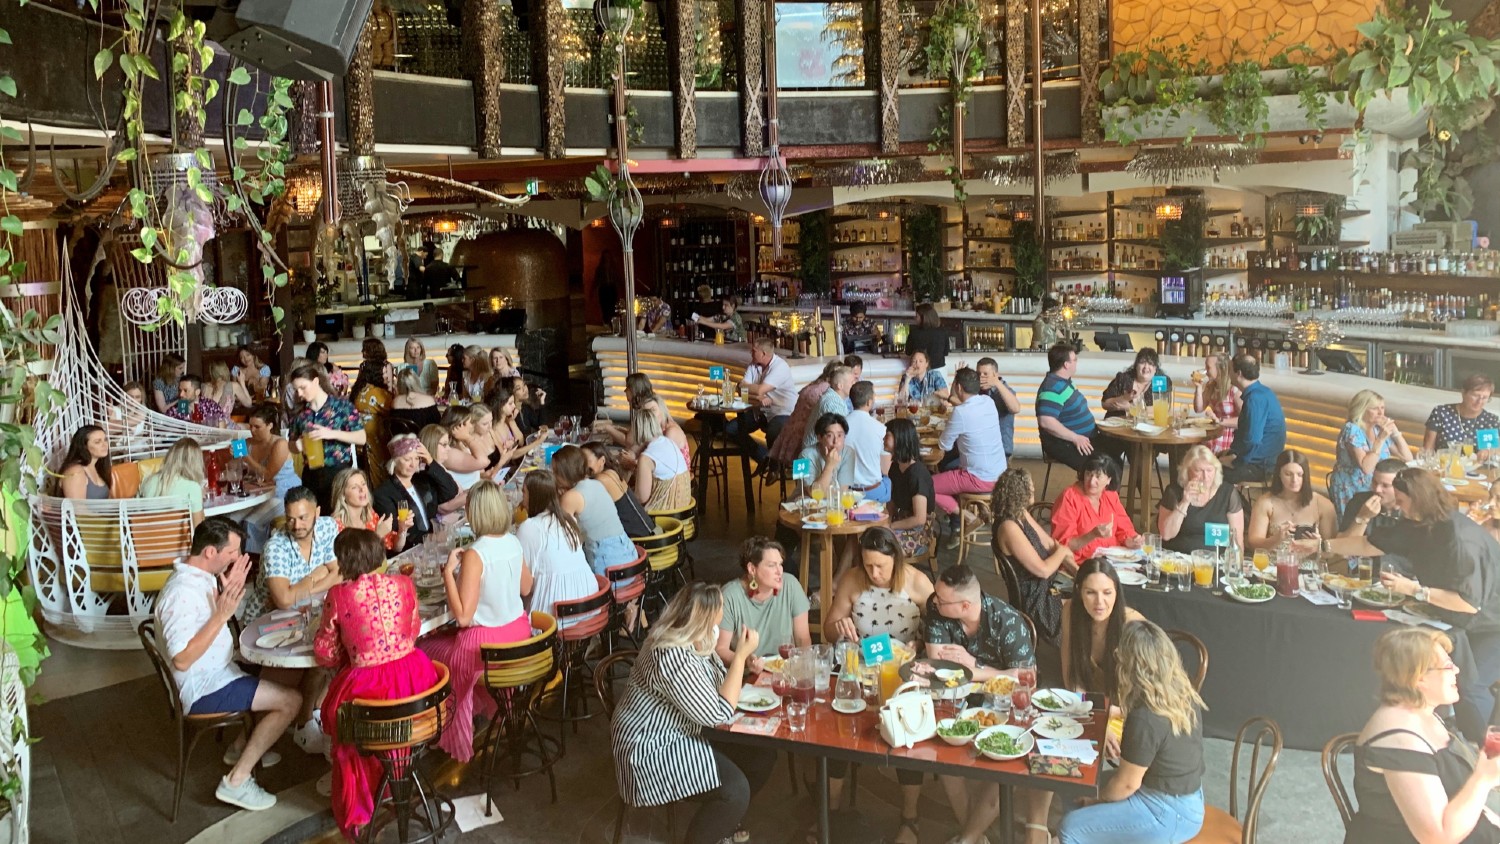 Brunch with Bite takes place in the main room at Cloudland